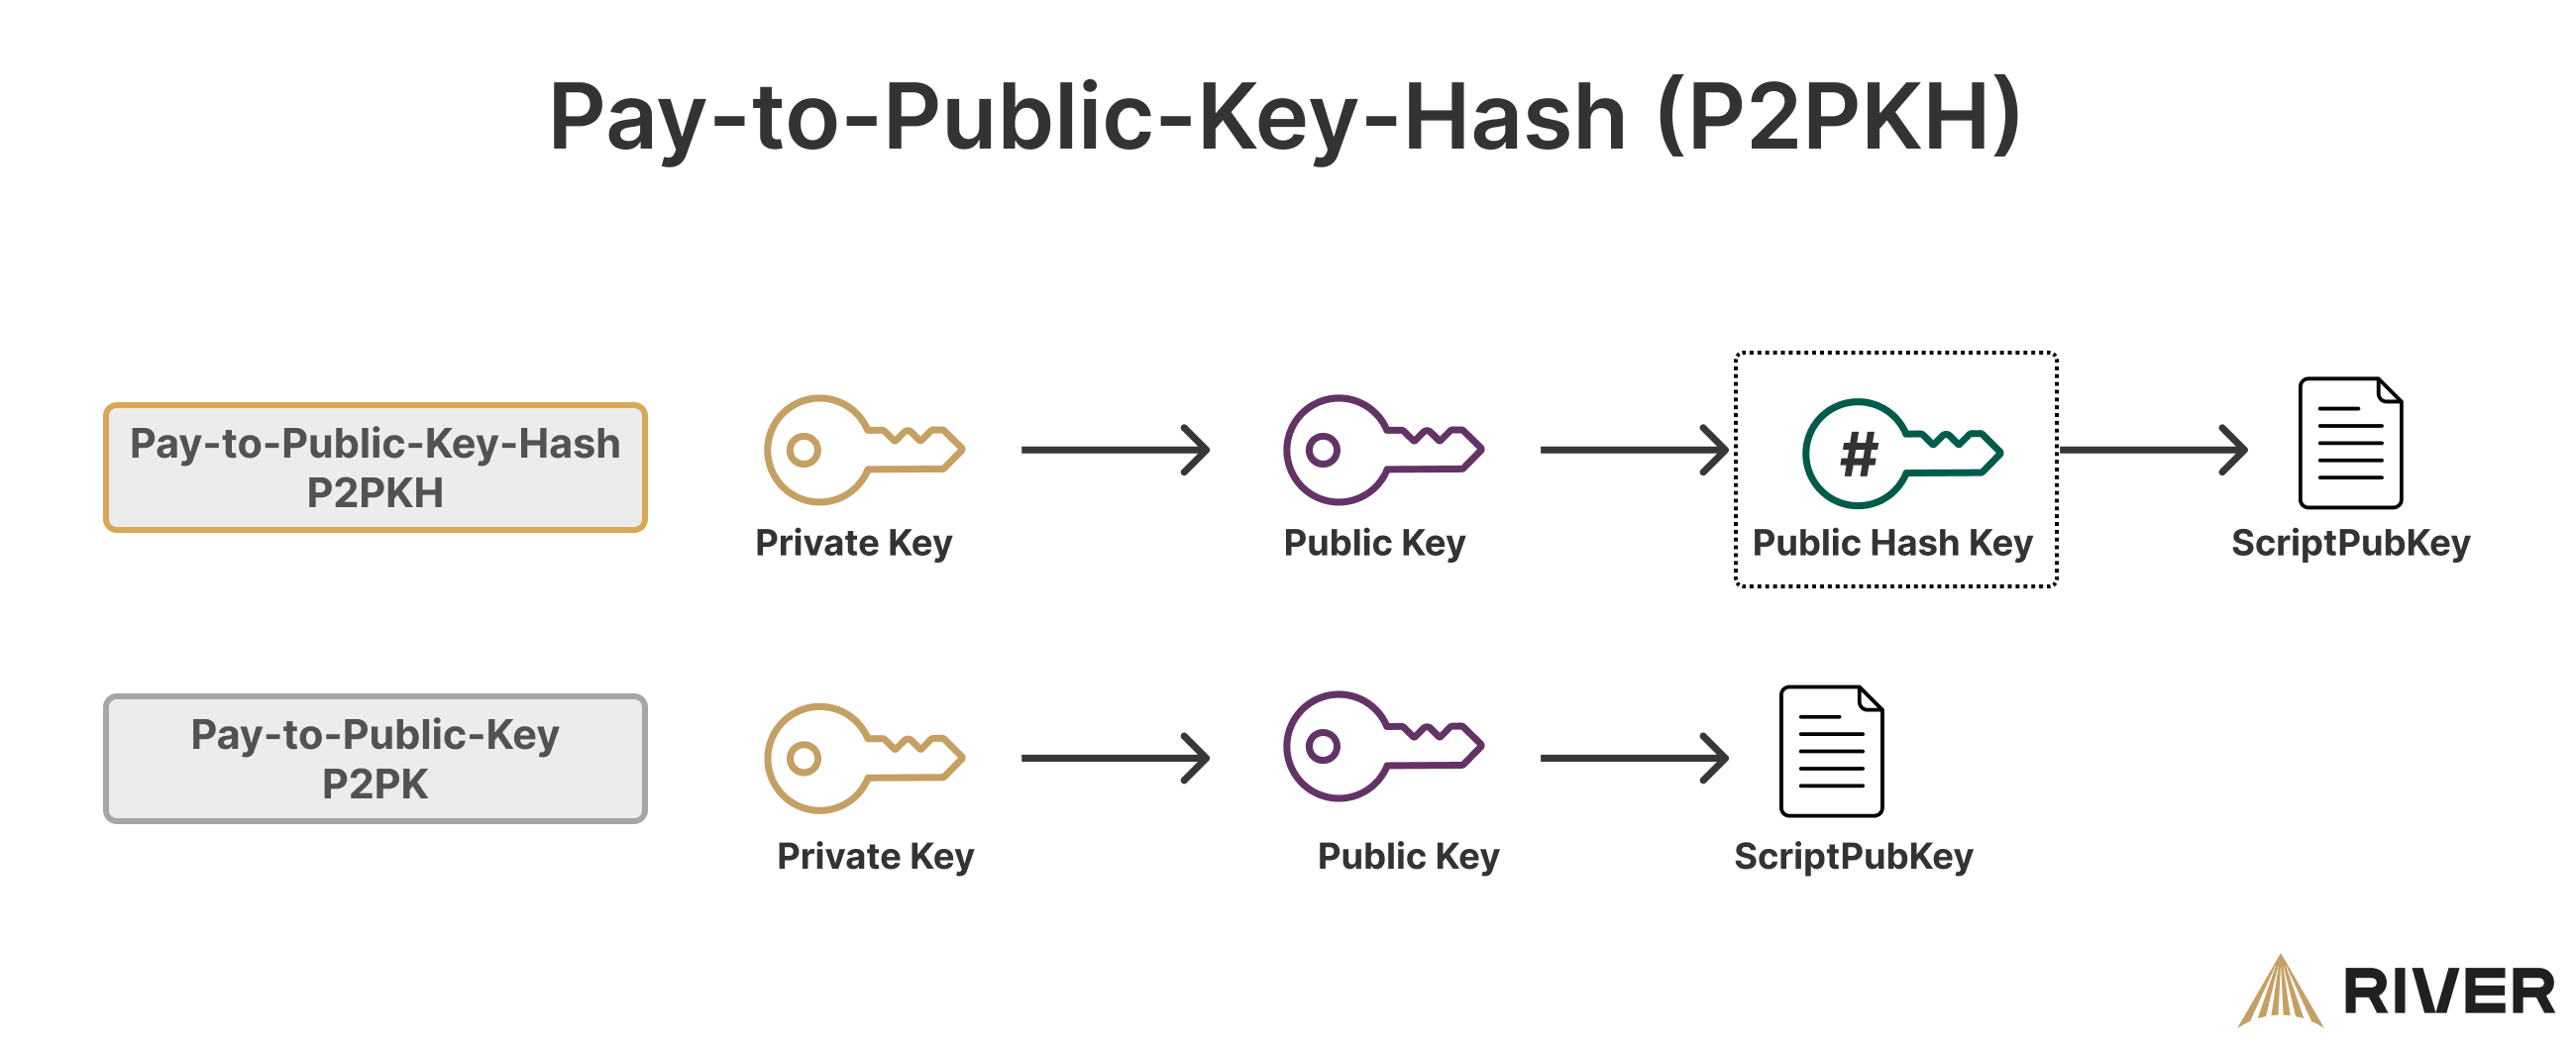 An infographic comparing Pay-to-Public-Key-Hash (P2PKH) and Pay-to-Public-Key (P2PK) processes in cryptocurrency transactions.